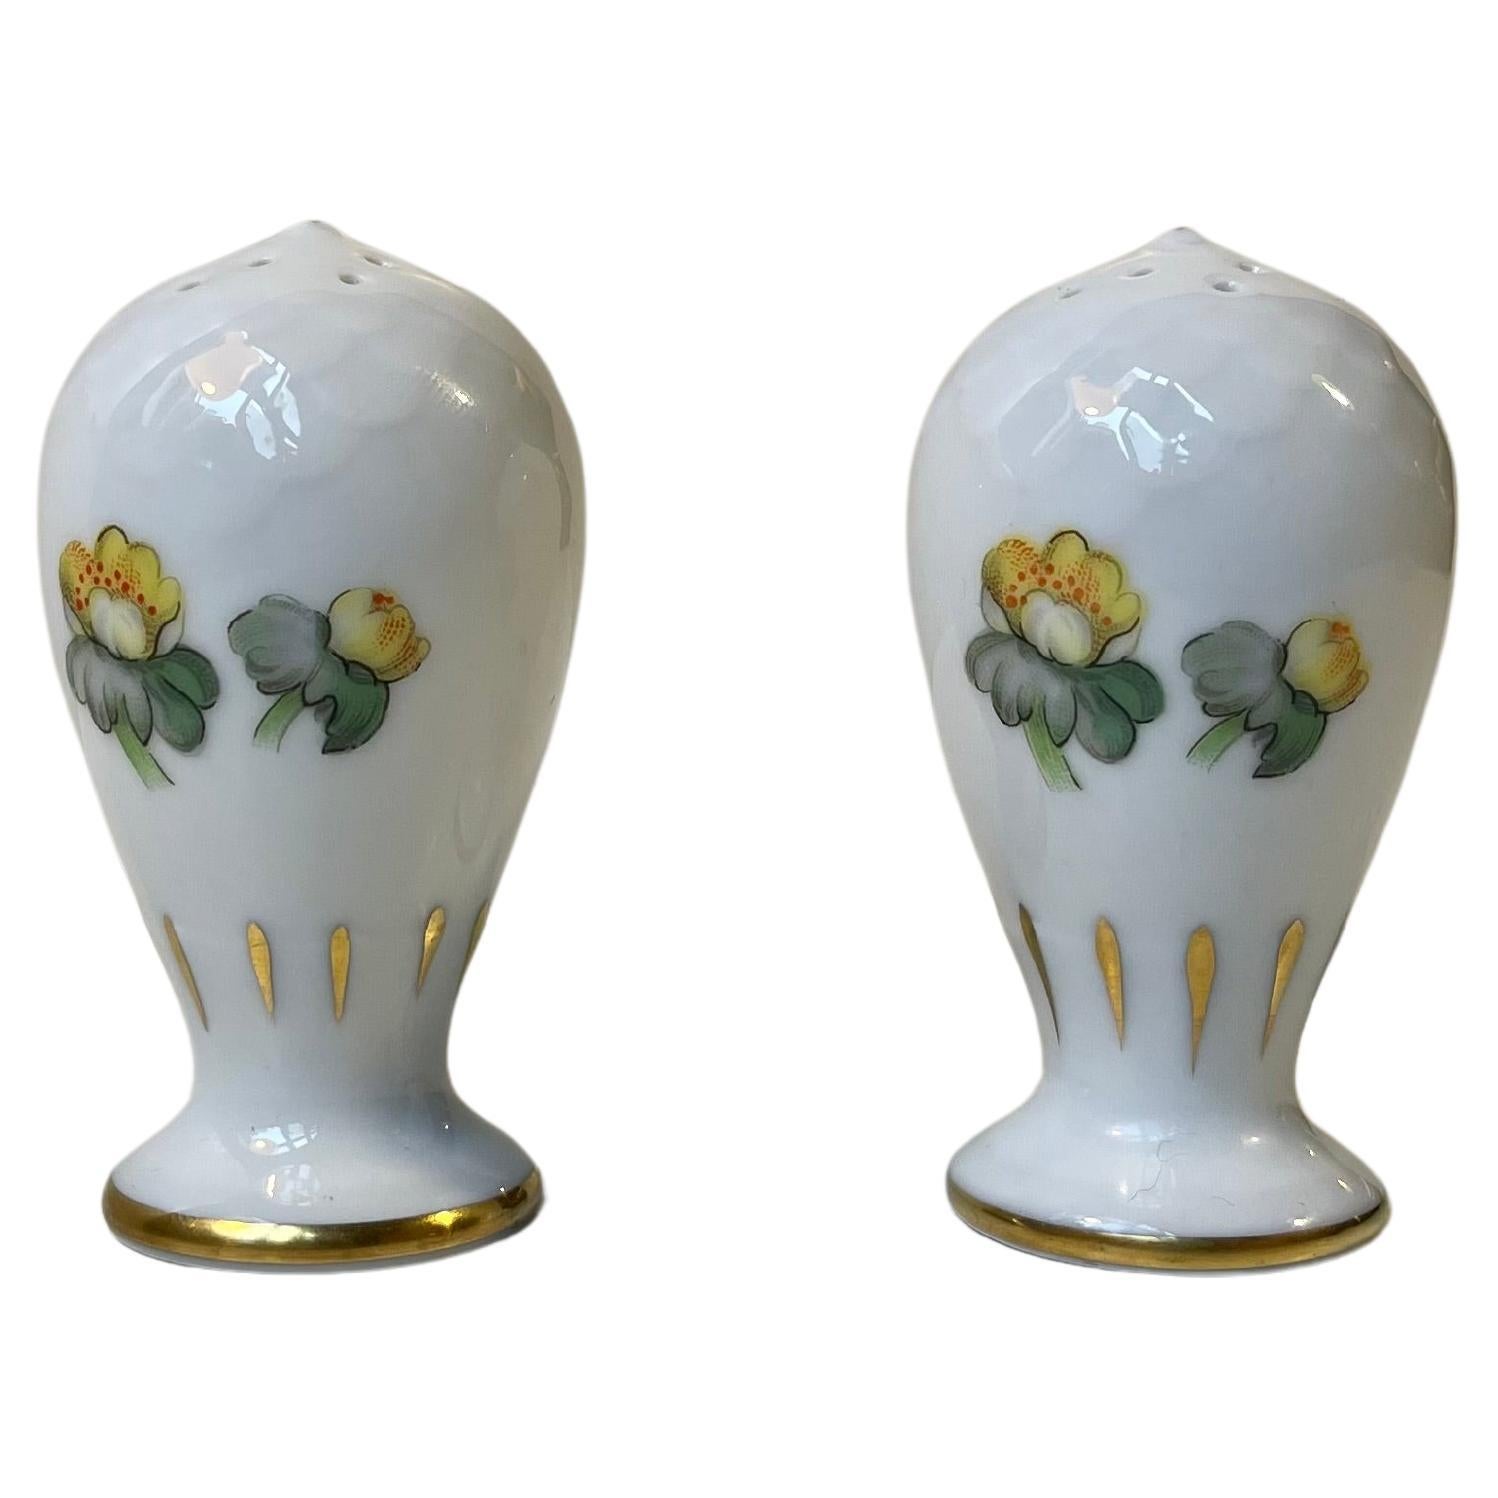 Porcelain Salt and Pepper shakers with Hand-Painted Errants by Bing & Grondahl  For Sale